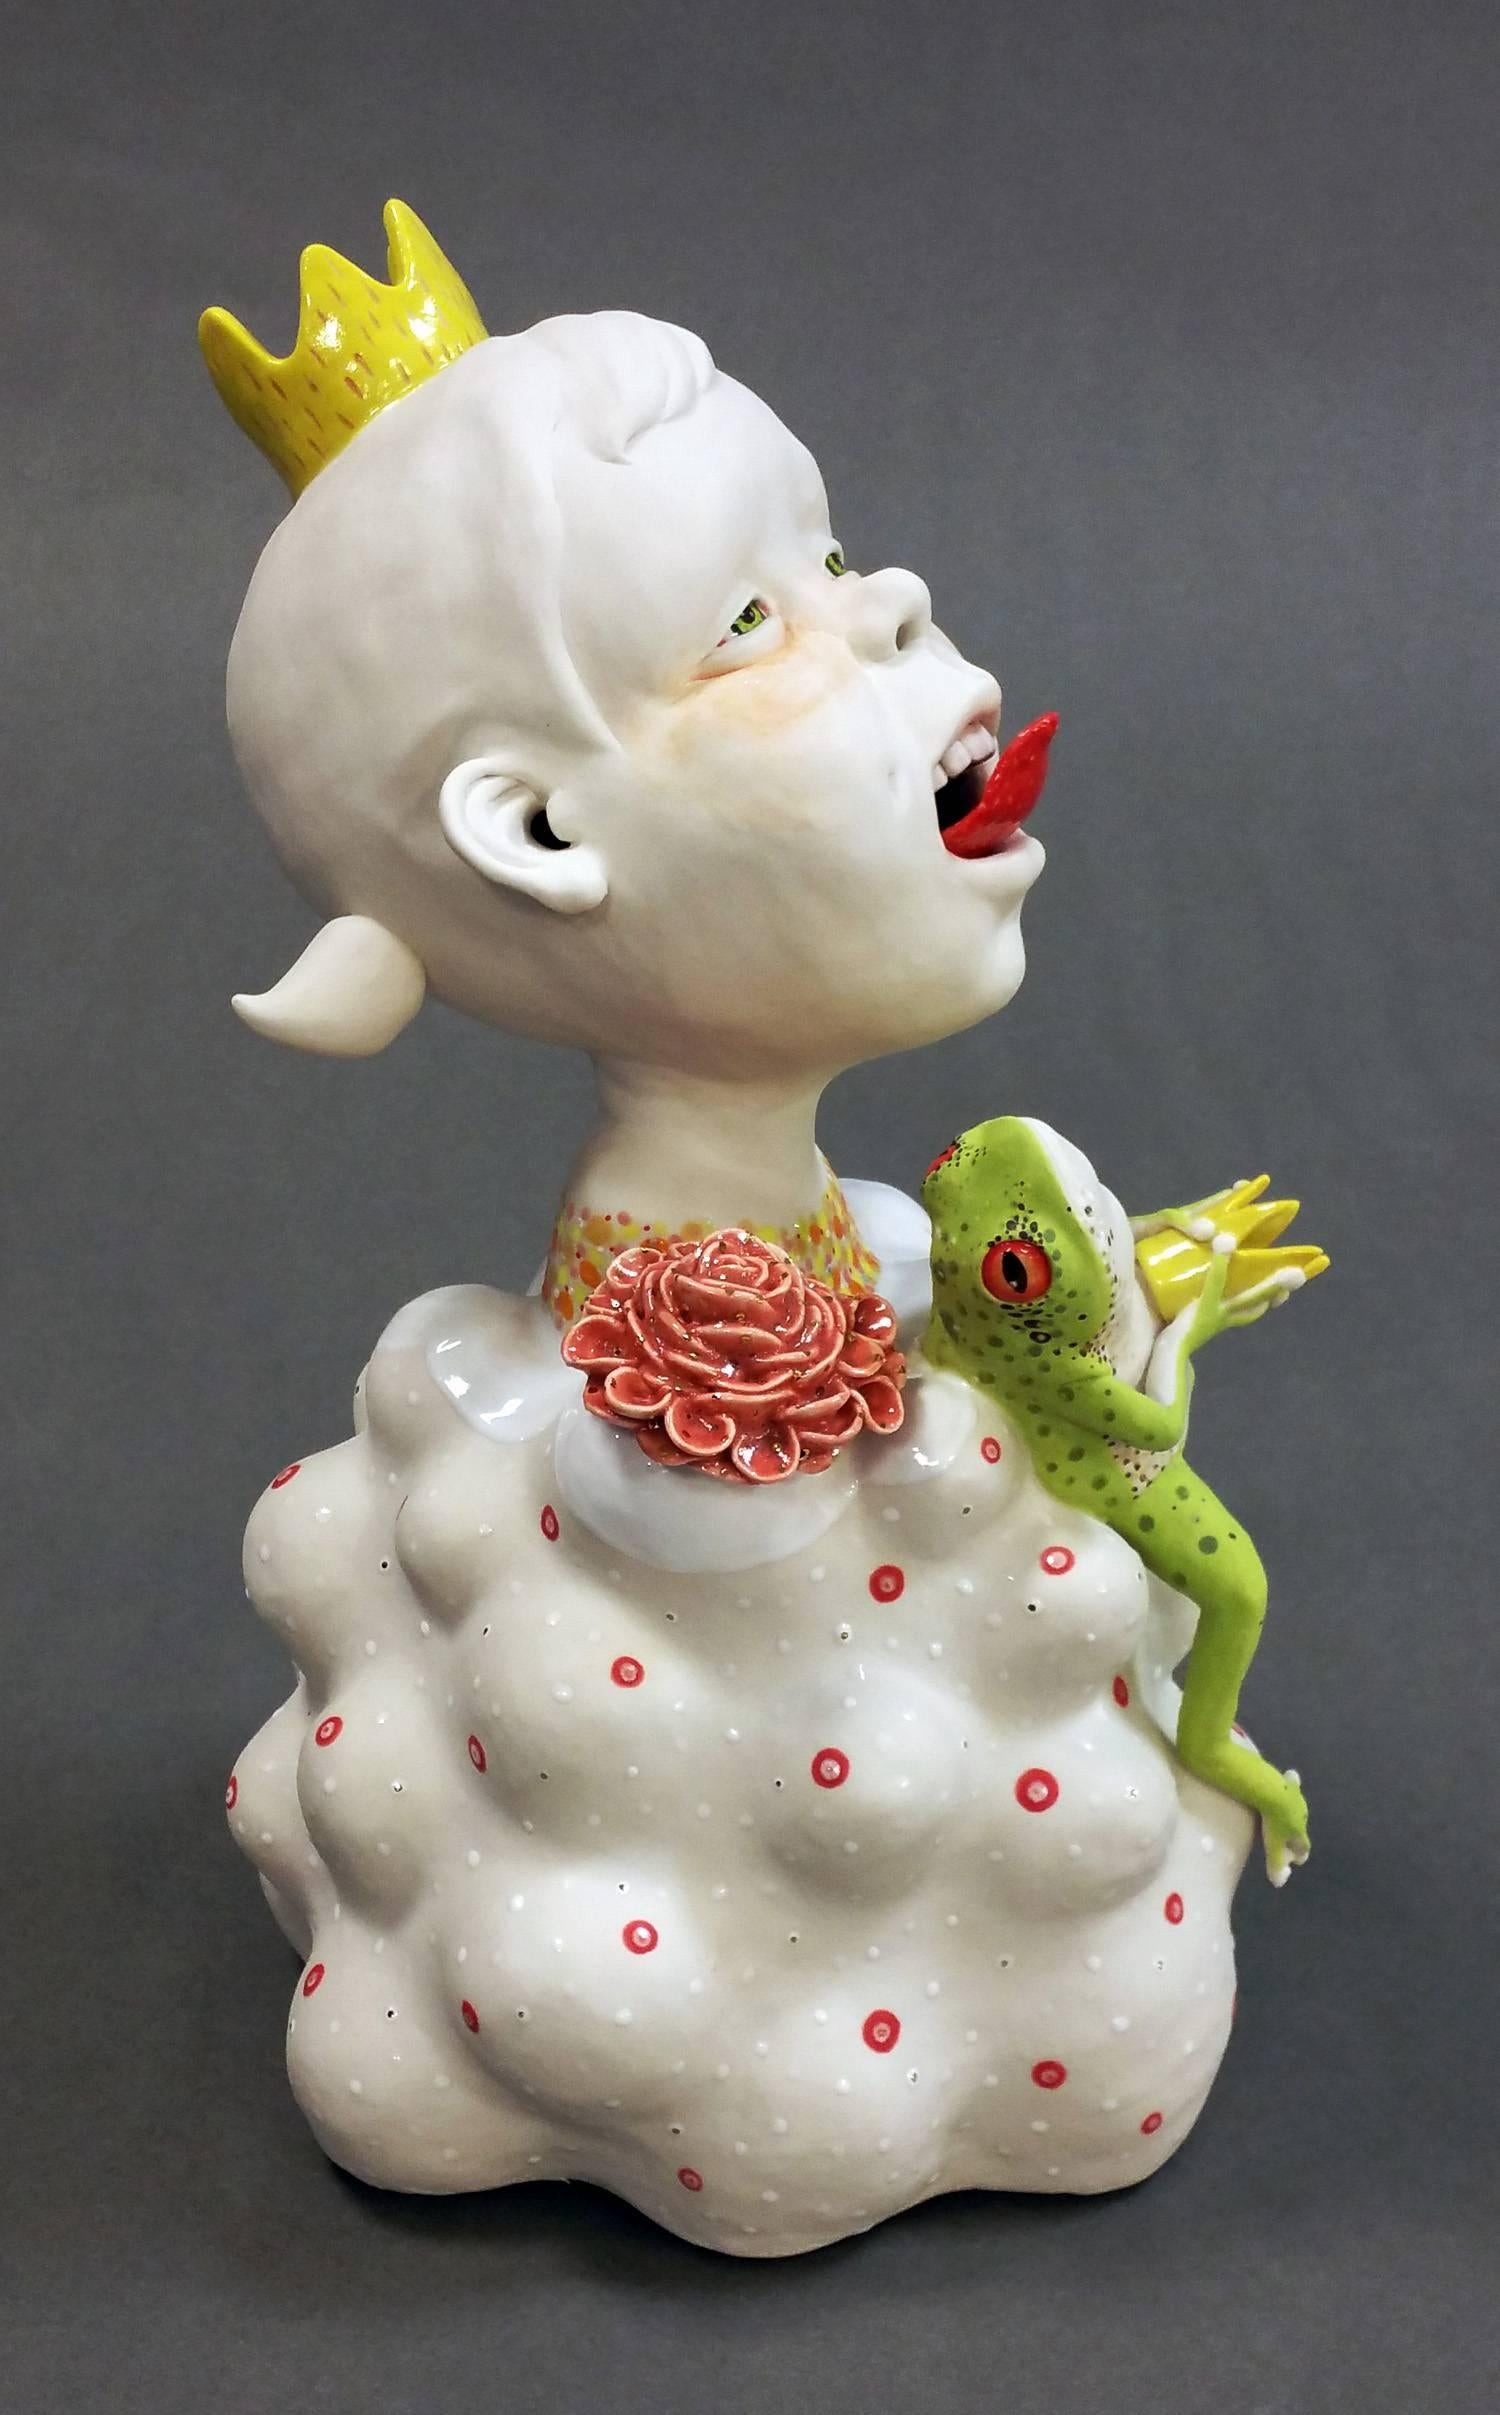 You're not my prince charming - Sculpture by Kyungmin Park